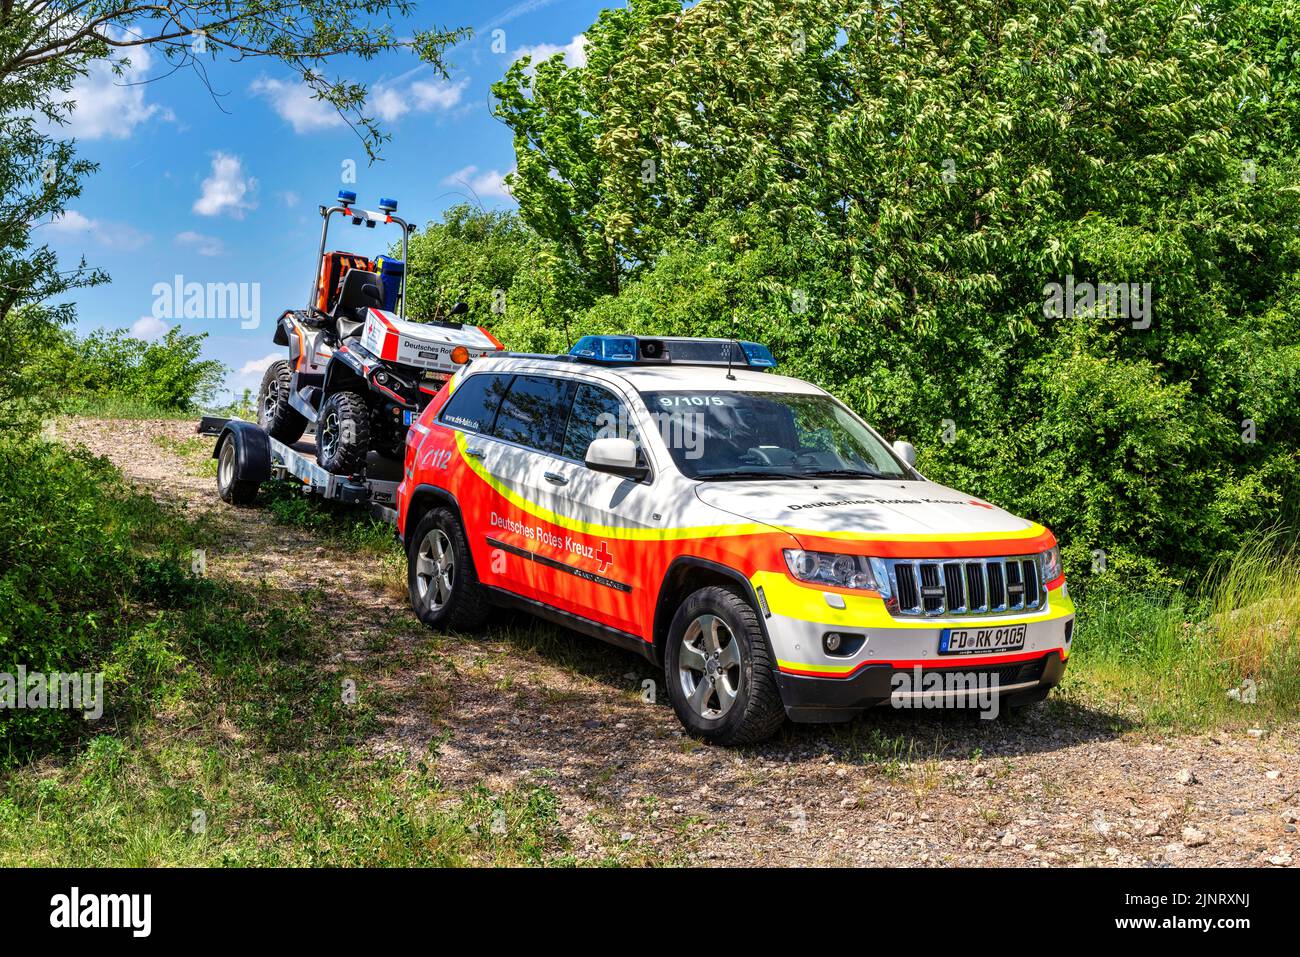 Emergency vehicle of DRK with an all terrain vehicle on the trailer Stock Photo